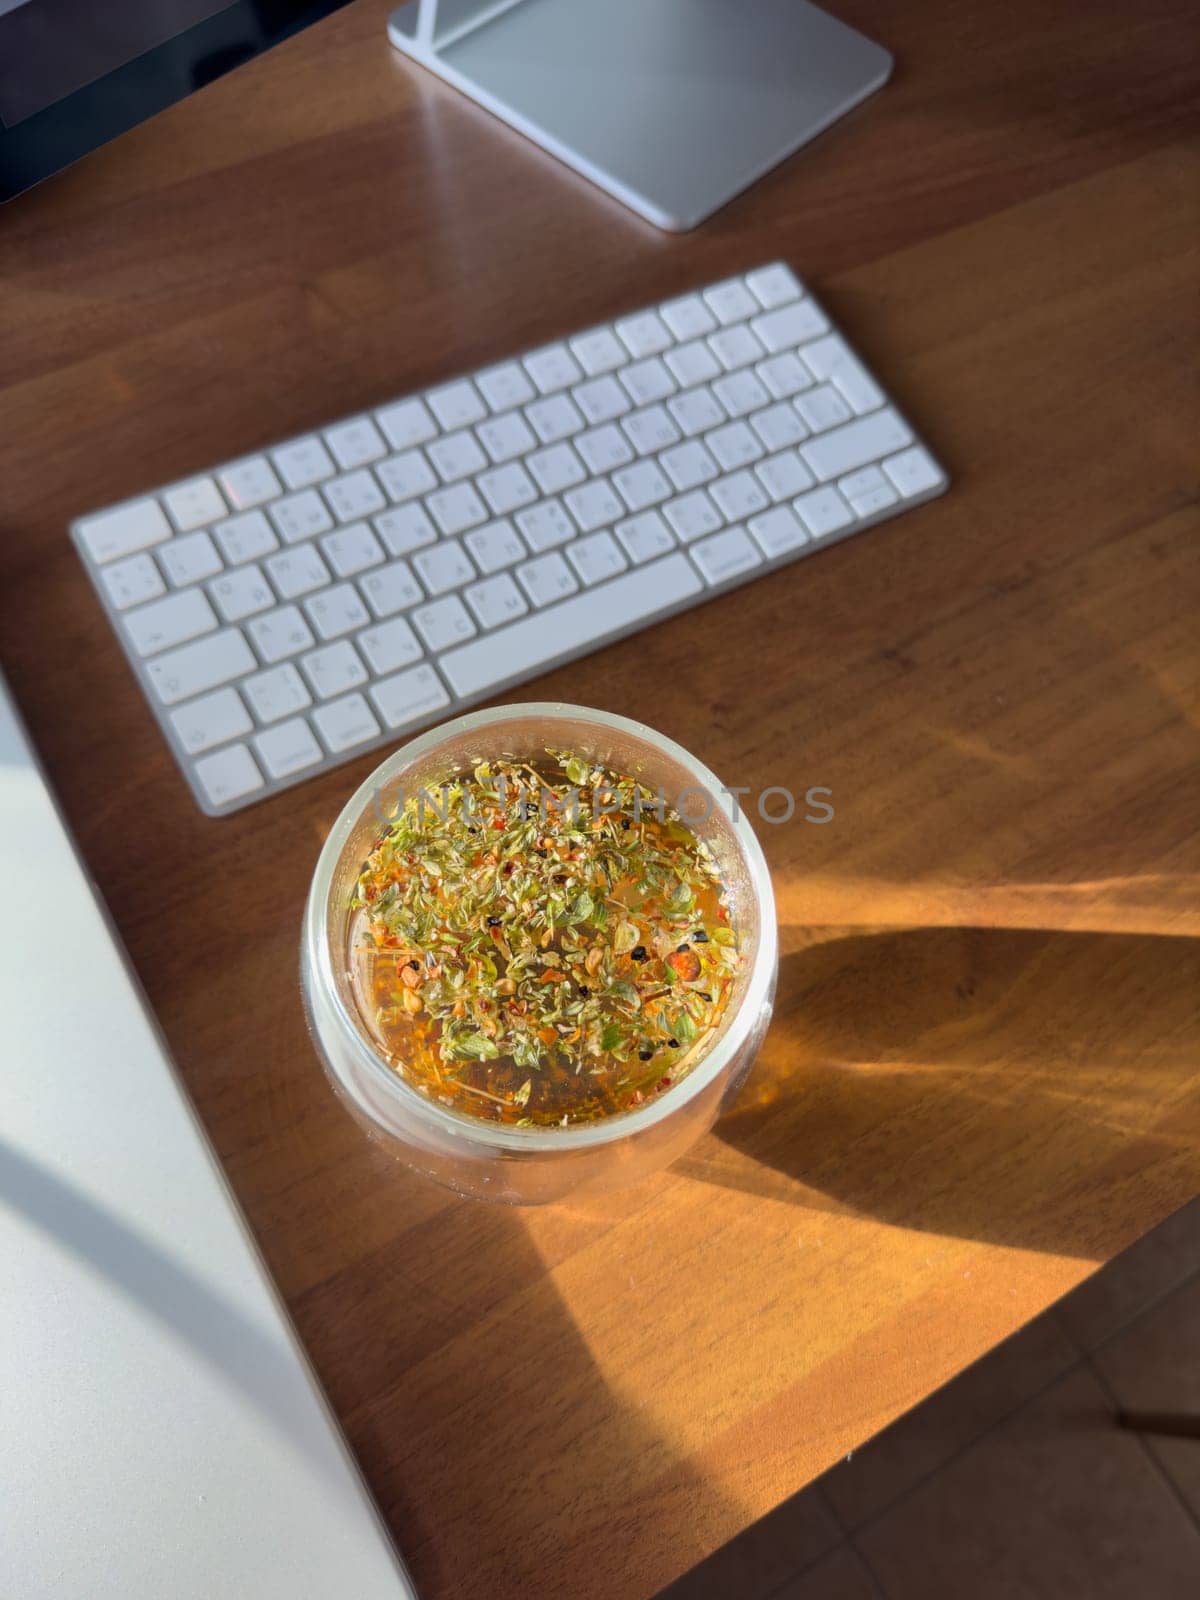 herbal tea with fruits is brewed in a transparent glass cup on the table, sunlight through the window beautifully illuminates the tea, a desktop with a laptop, monitor, wireless keyboard. High quality photo